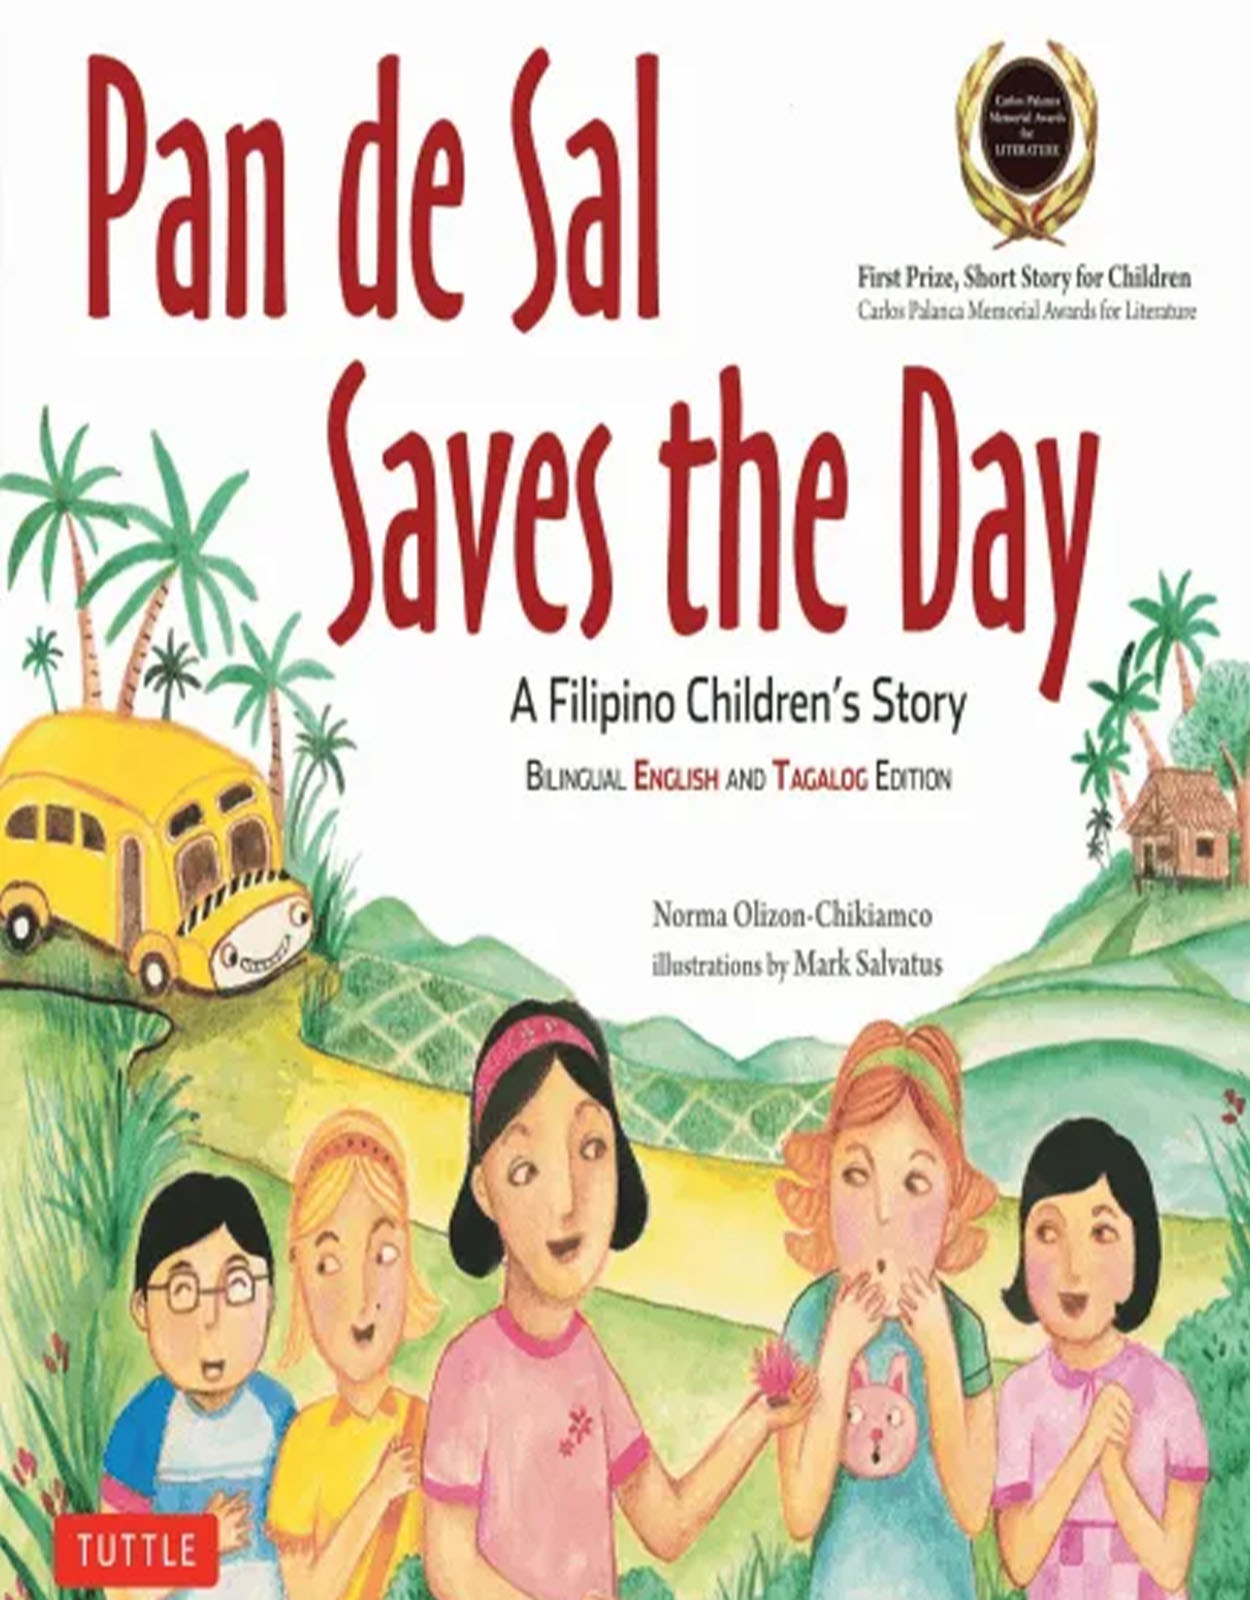 Tagalog Stories for Kids: Pan de Sal Saves the Day: A Filipino Children's Story